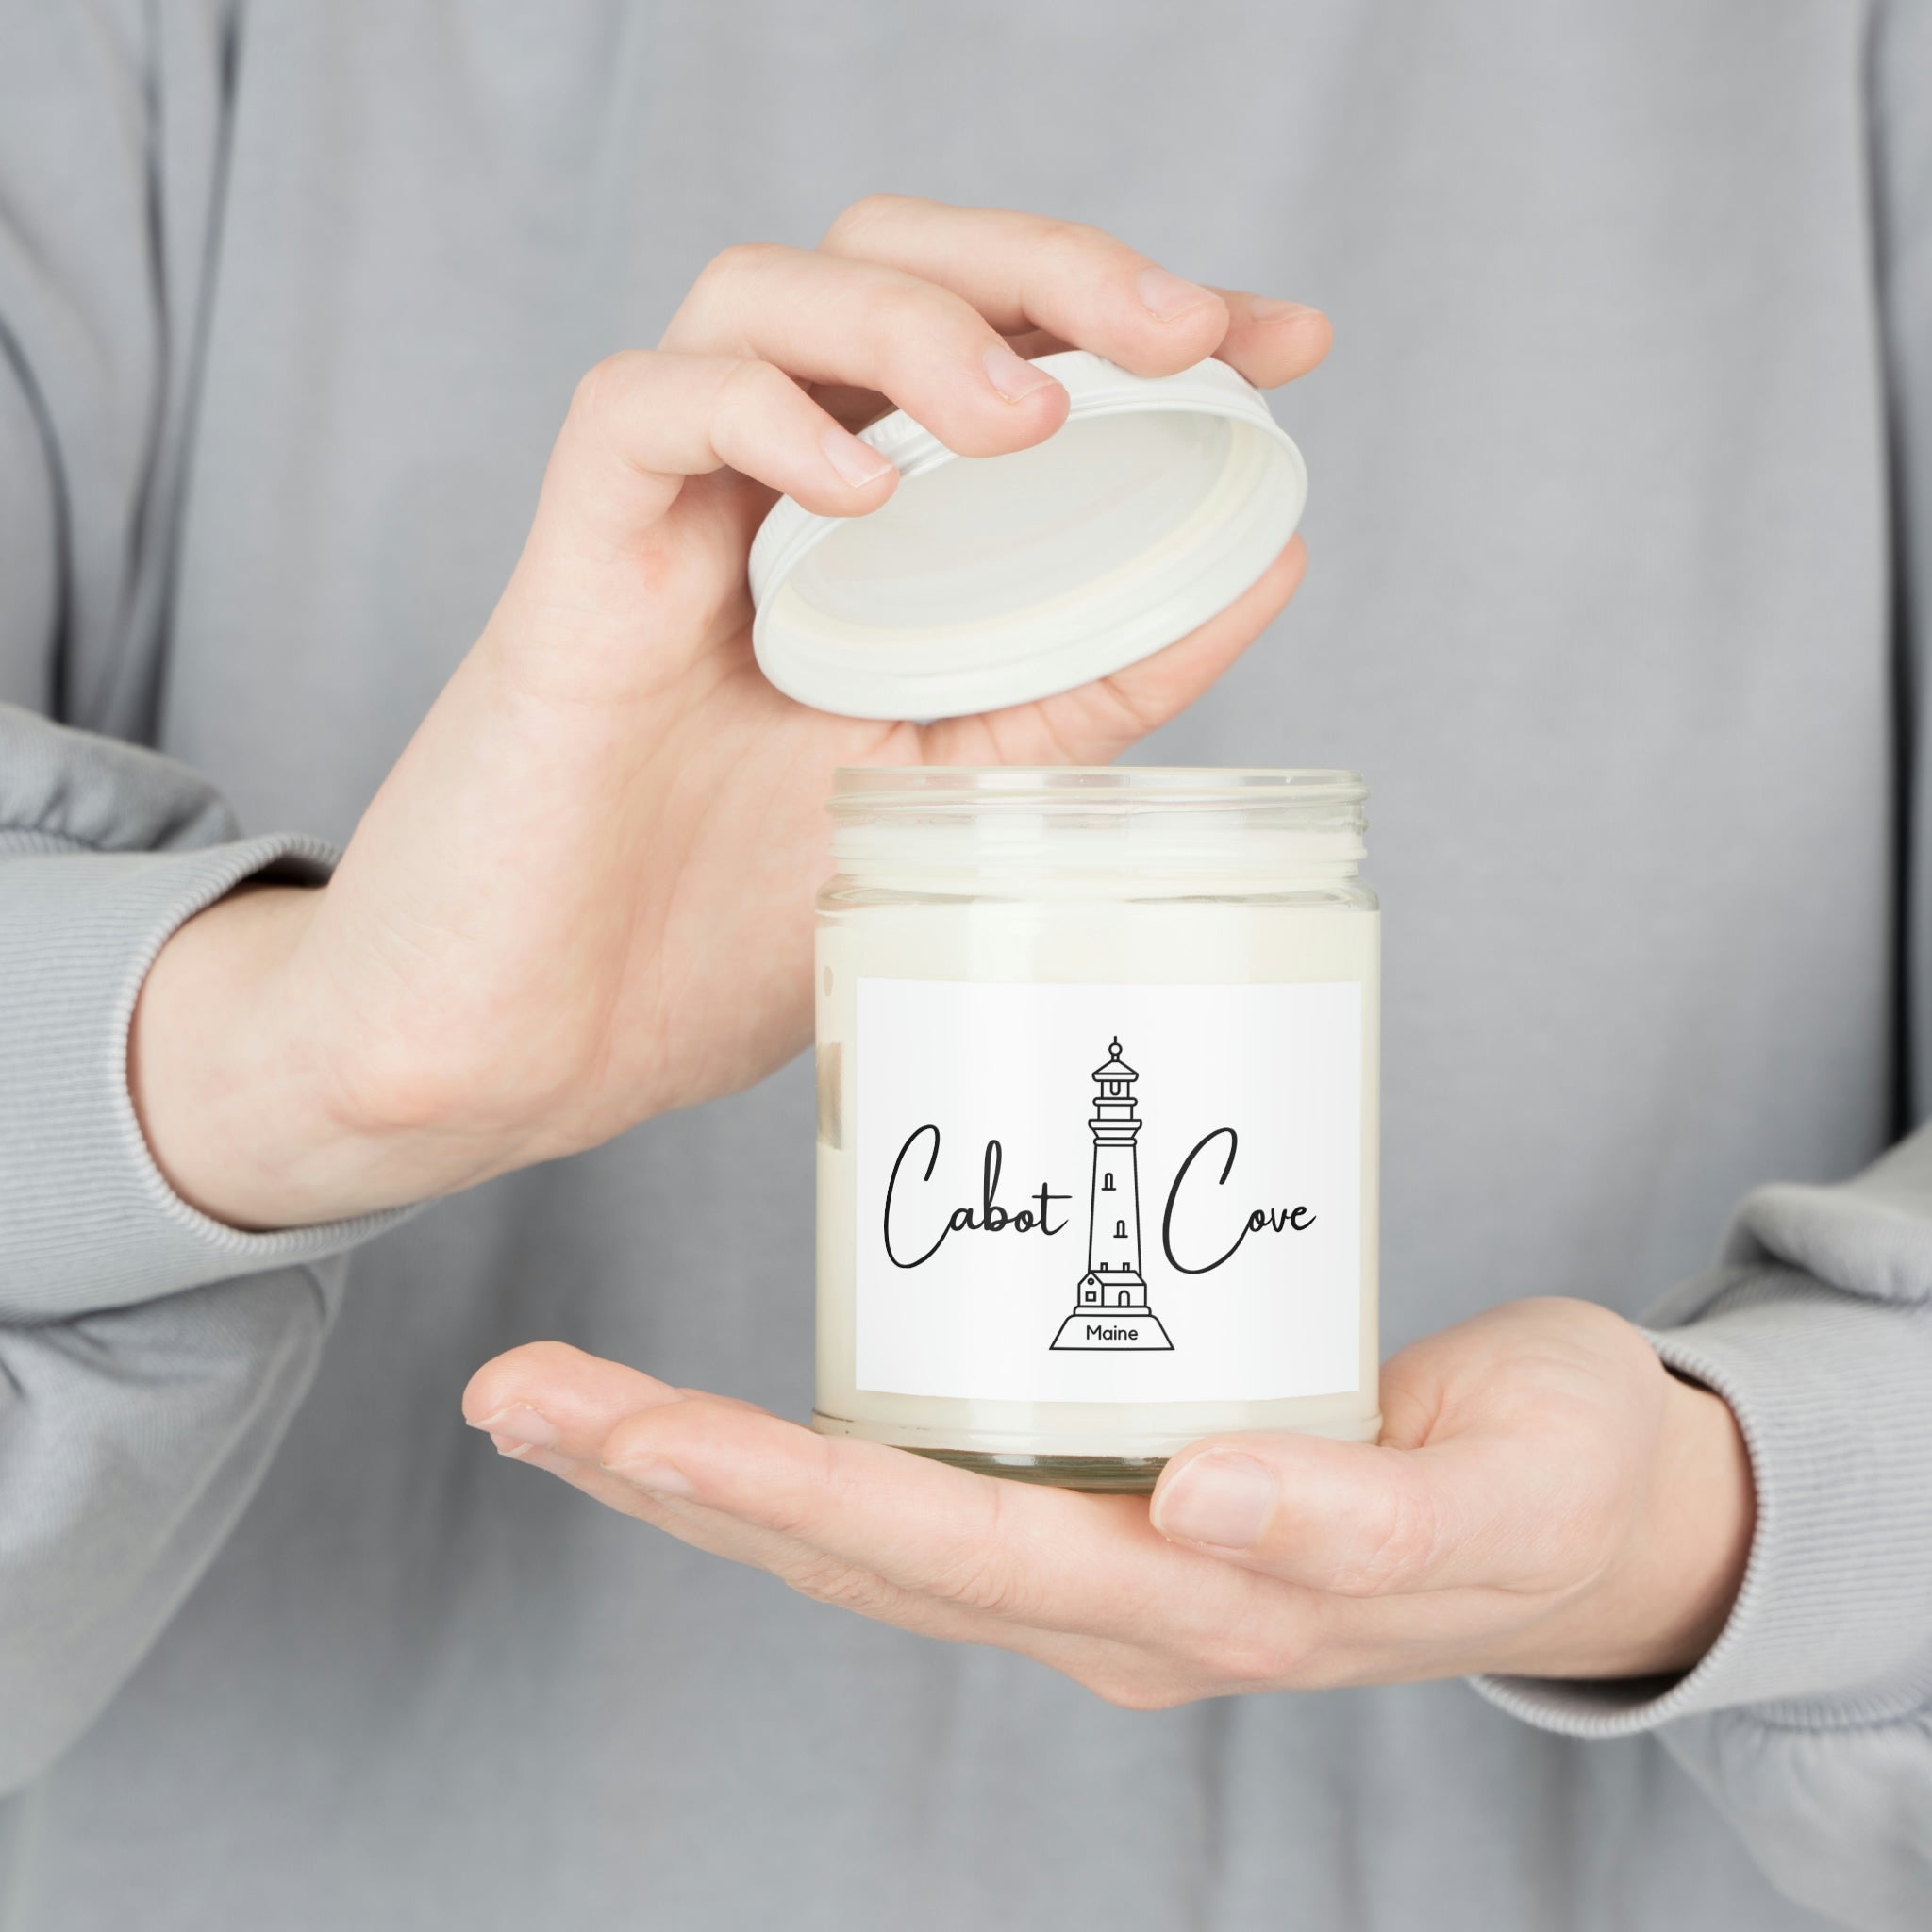 Women holding a close up shot of Cabot Cove Soy Candle 